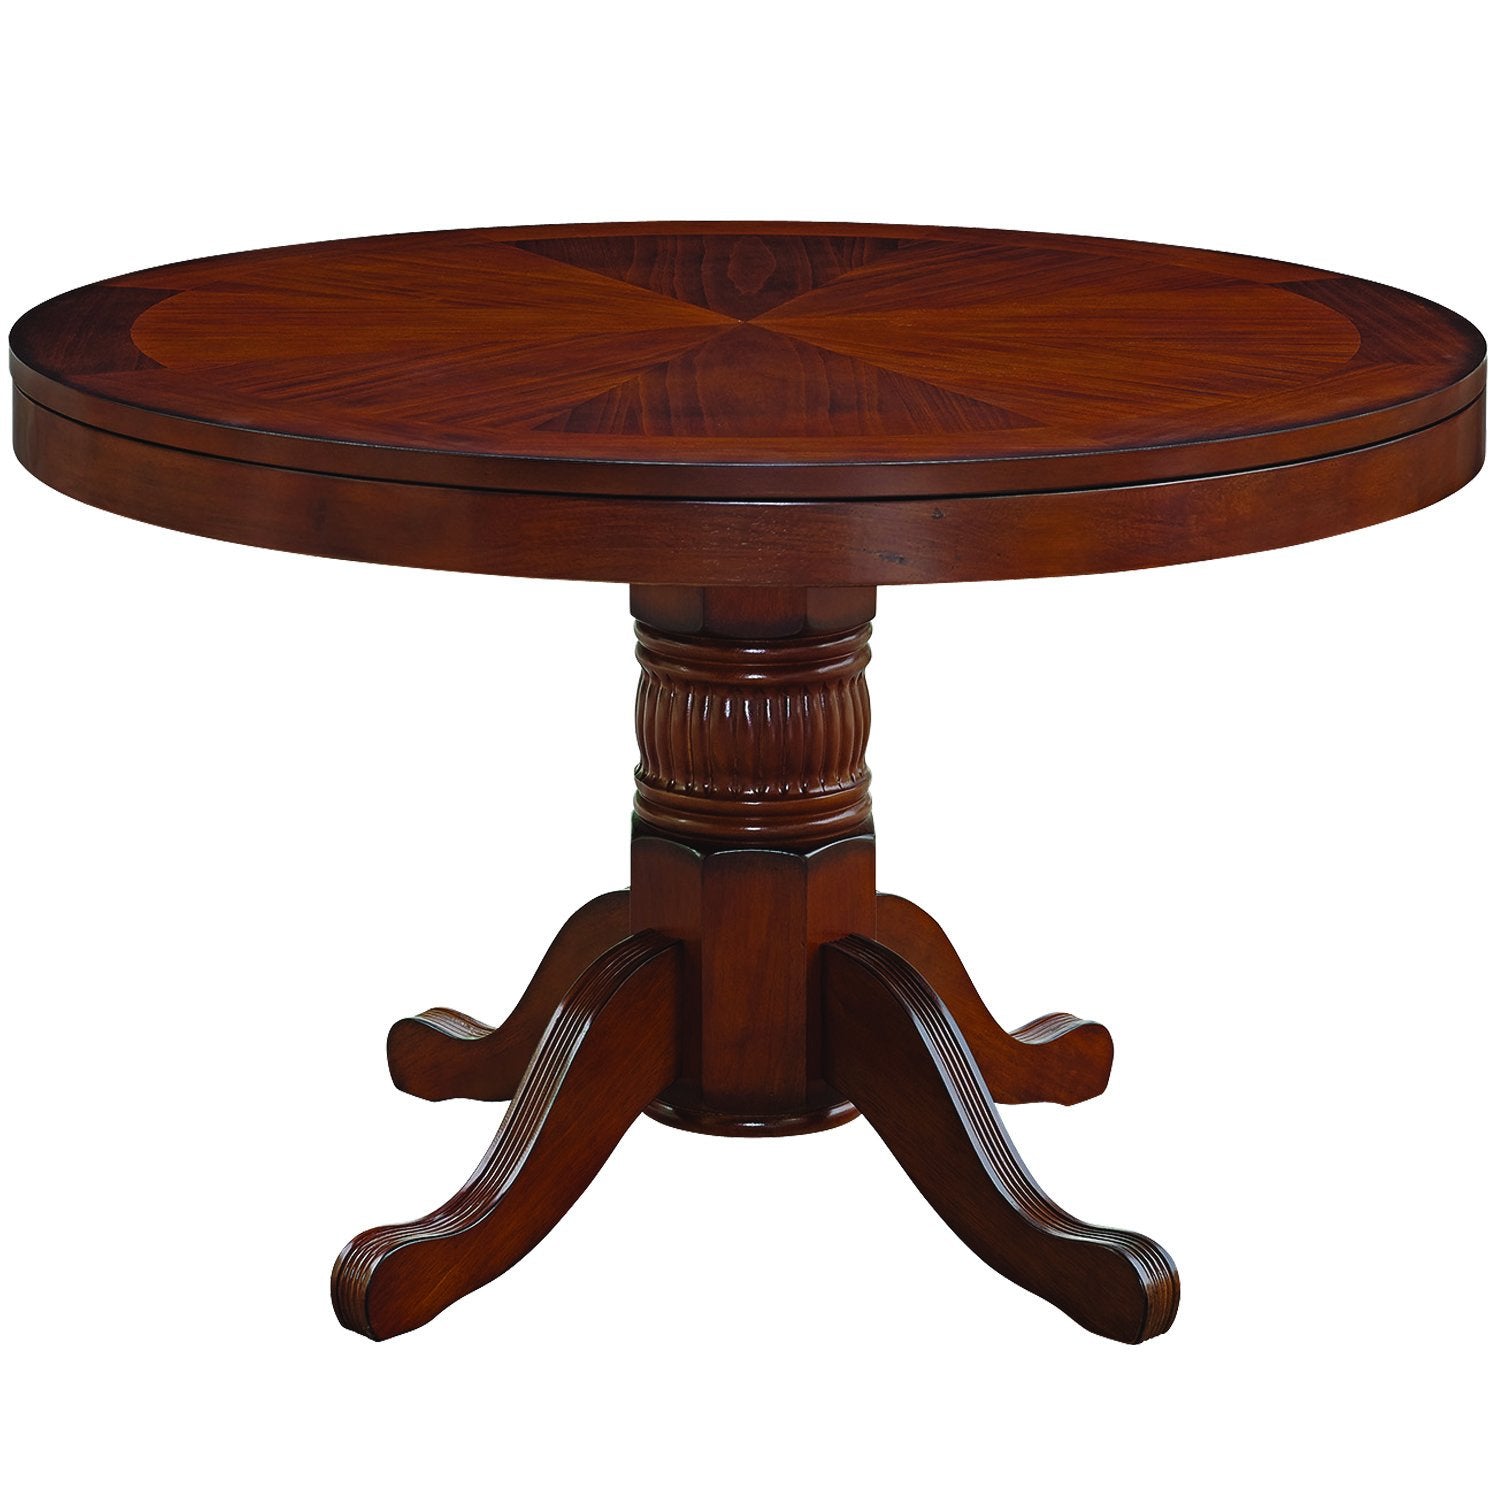 ram game room 48 texas holdem game table gtbl48-Chestnut with dining top